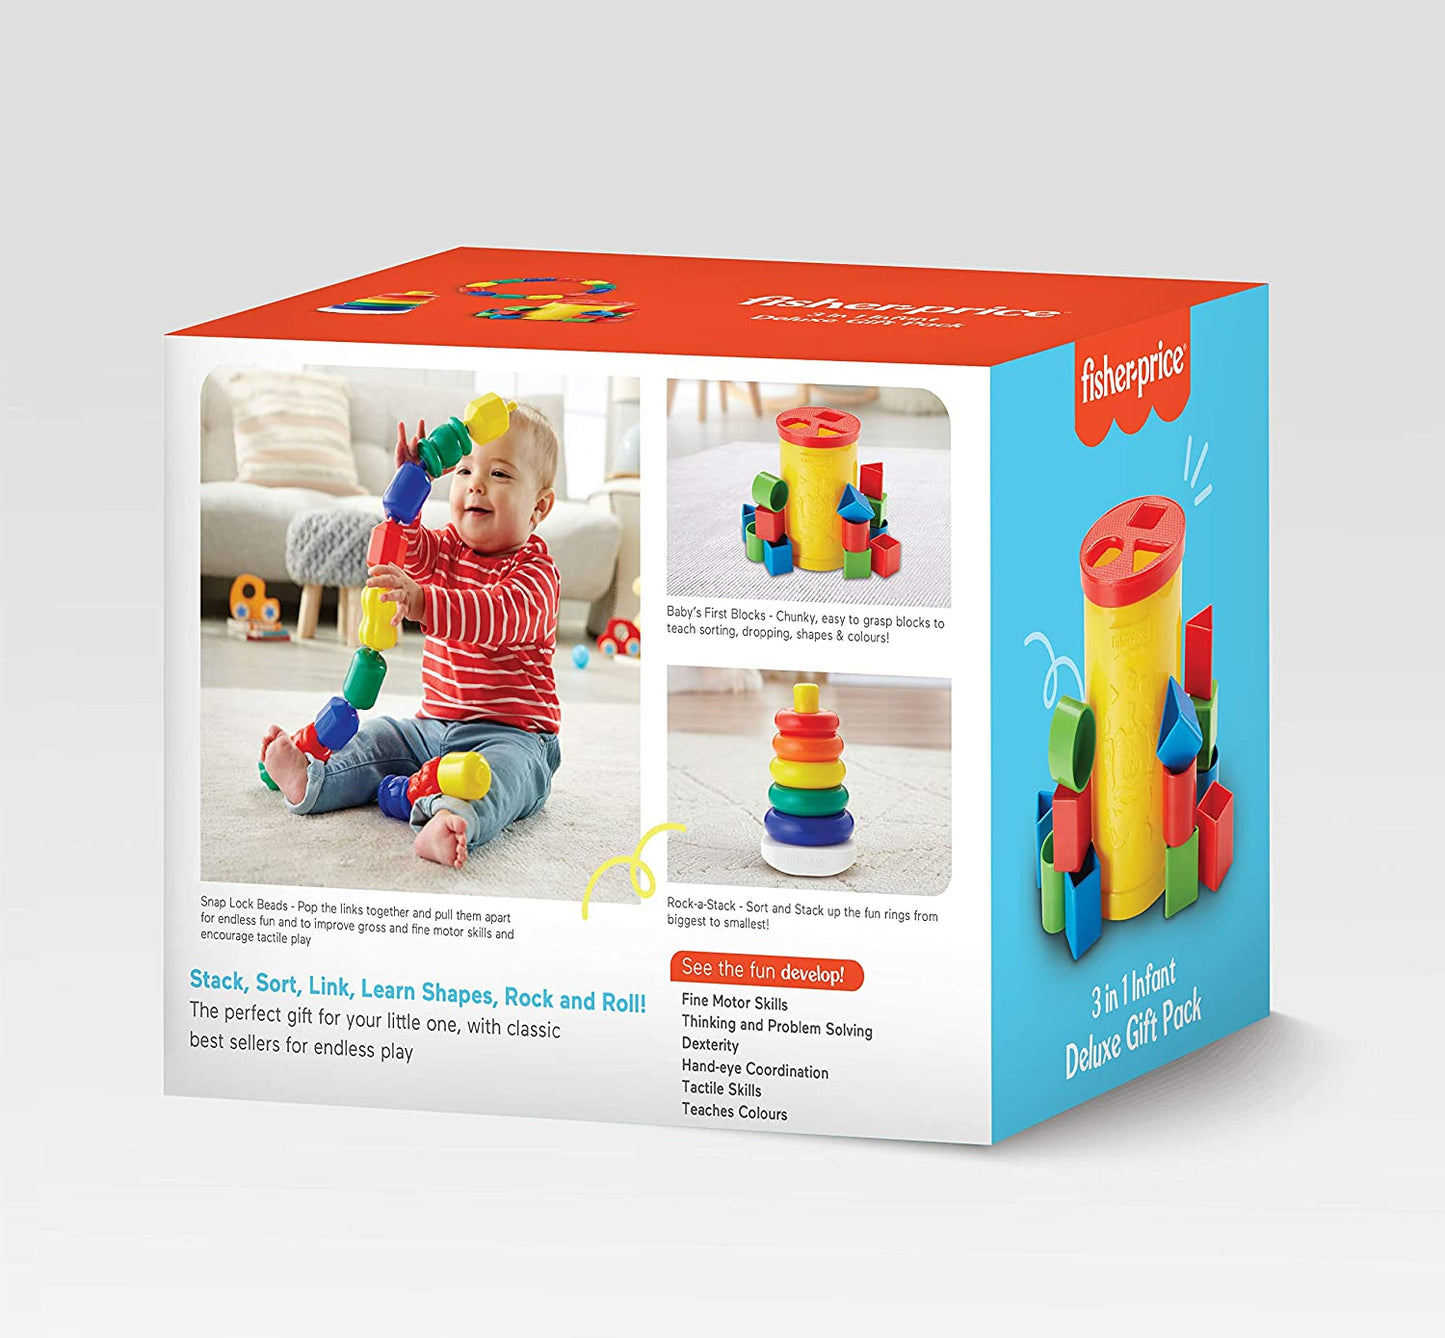 Buy Fisher-Price 3-in-1 Infant Deluxe Gift Pack online at Best Price in India from kiddiewonderland.in. Explore Fast and free delivery across India with special discount offers. 